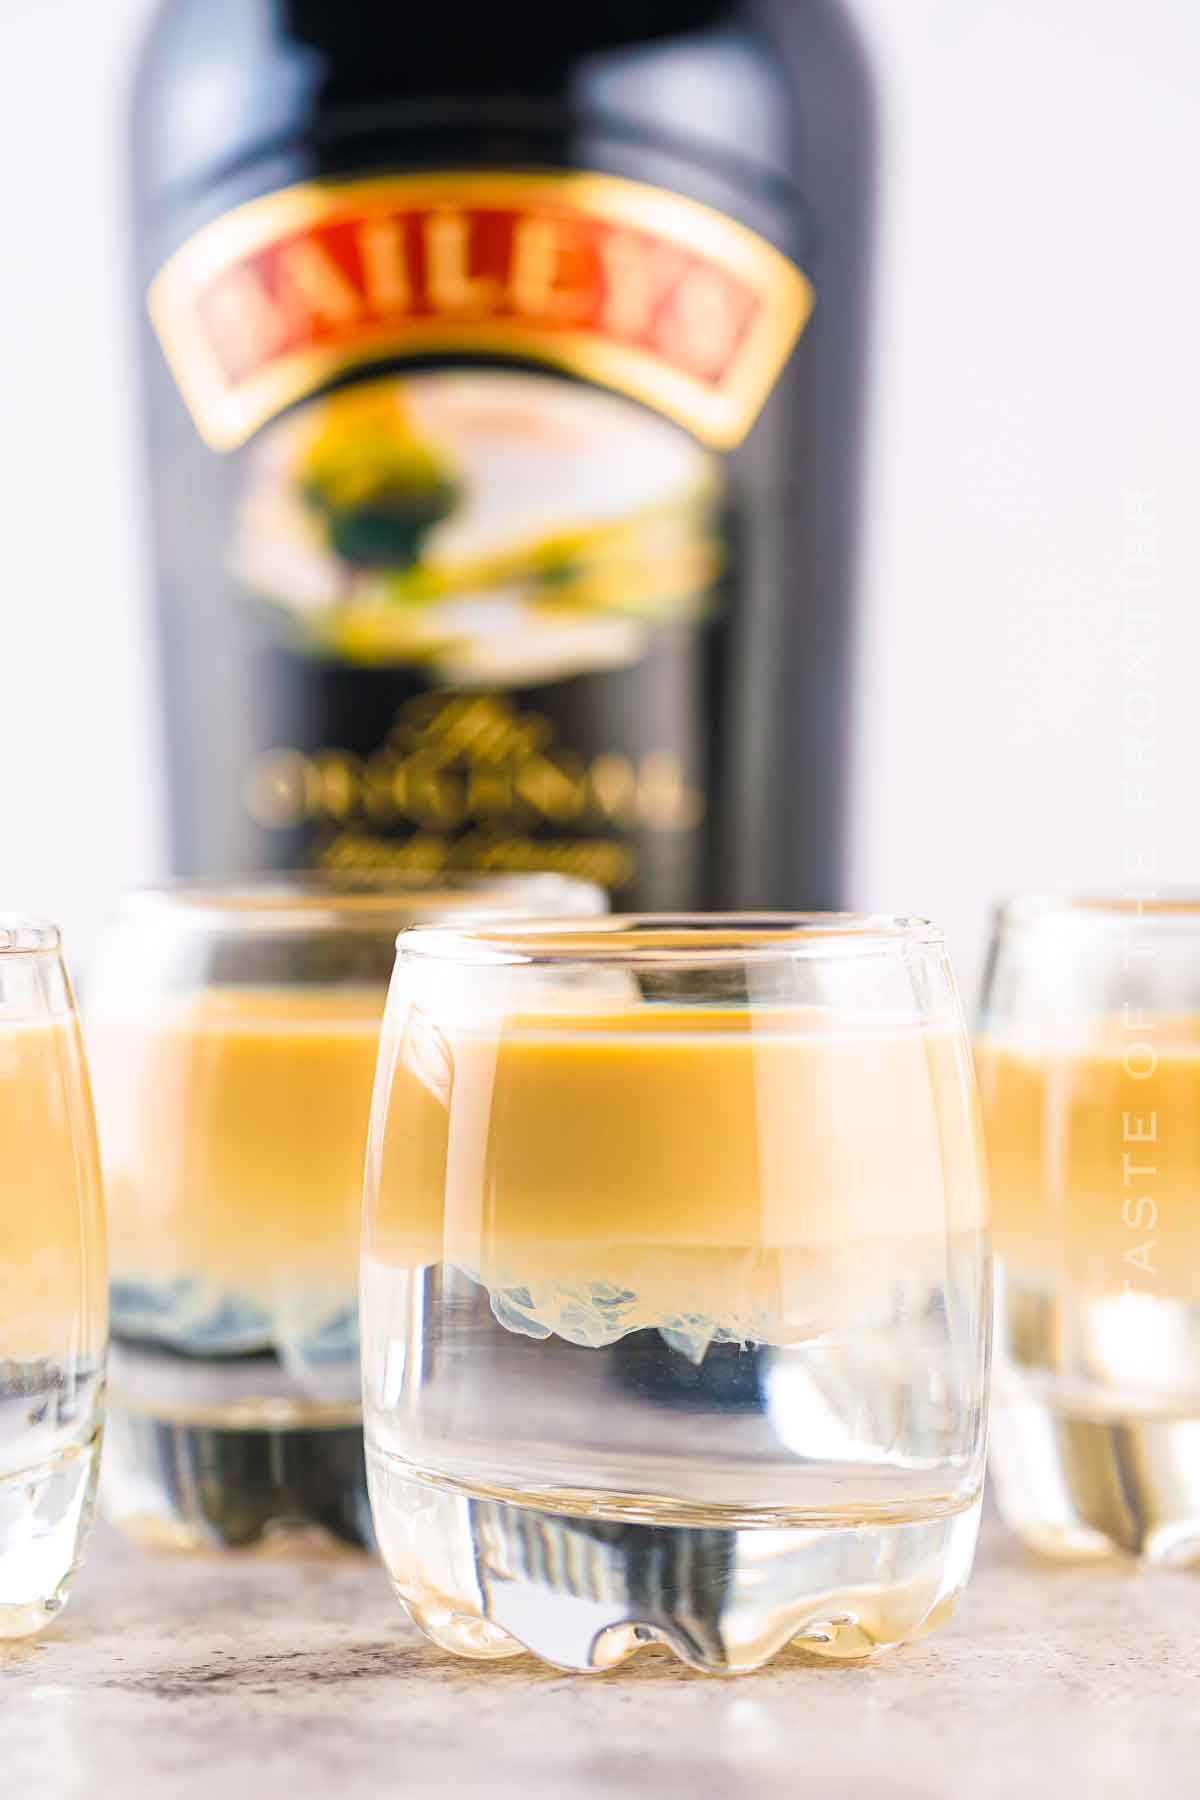 bailey's and schnapps chot recipe